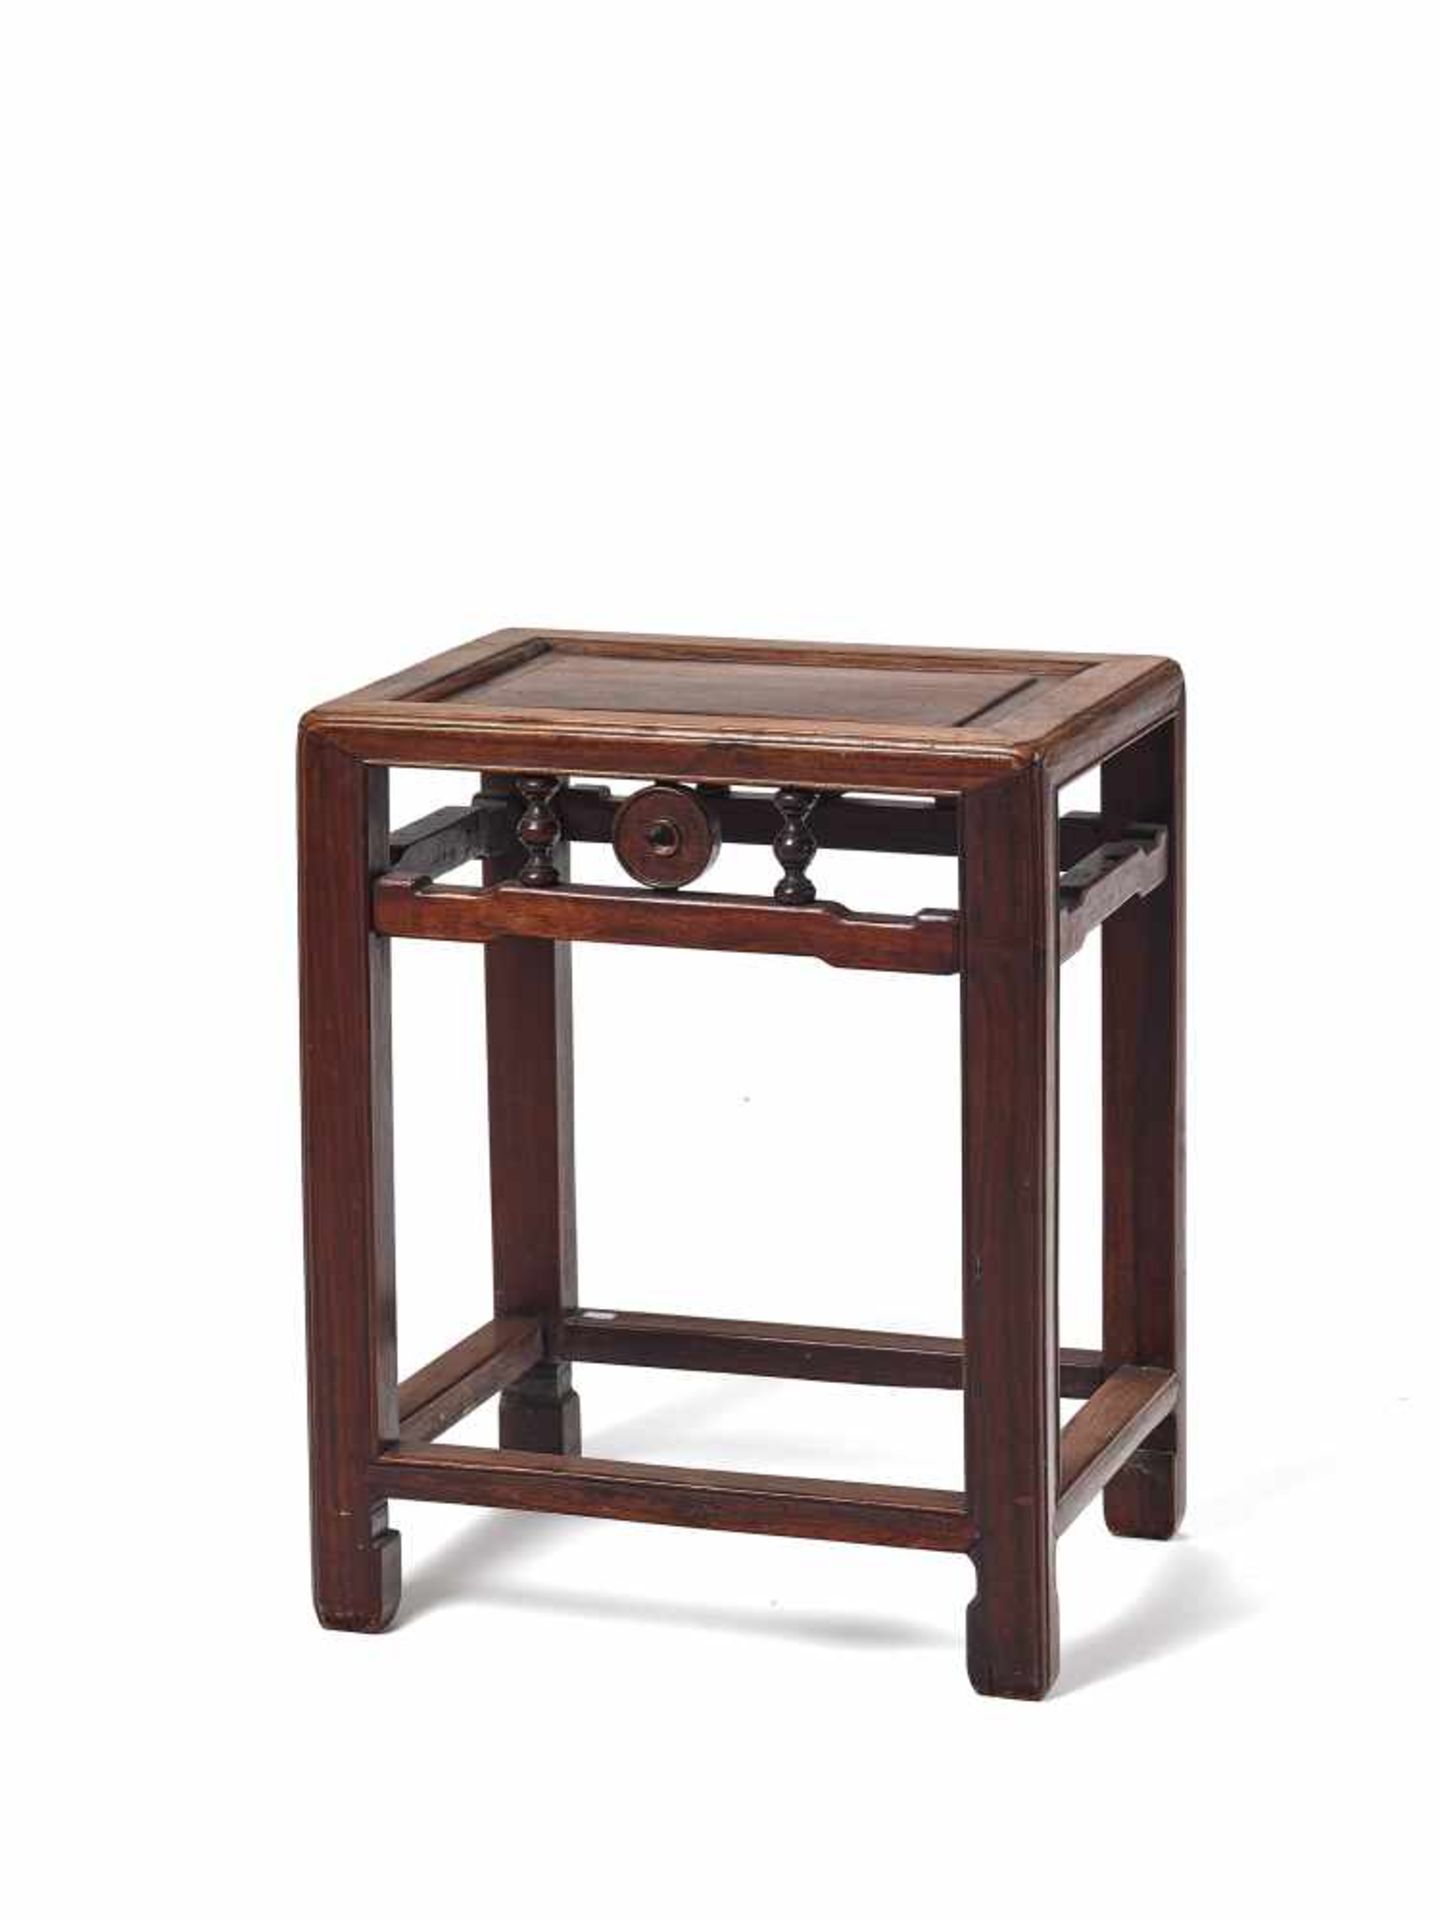 A CHINESE HARDWOOD SIDE TABLE, LATE QING DYNASTYHardwood, possibly Hongmu, with fine openwork